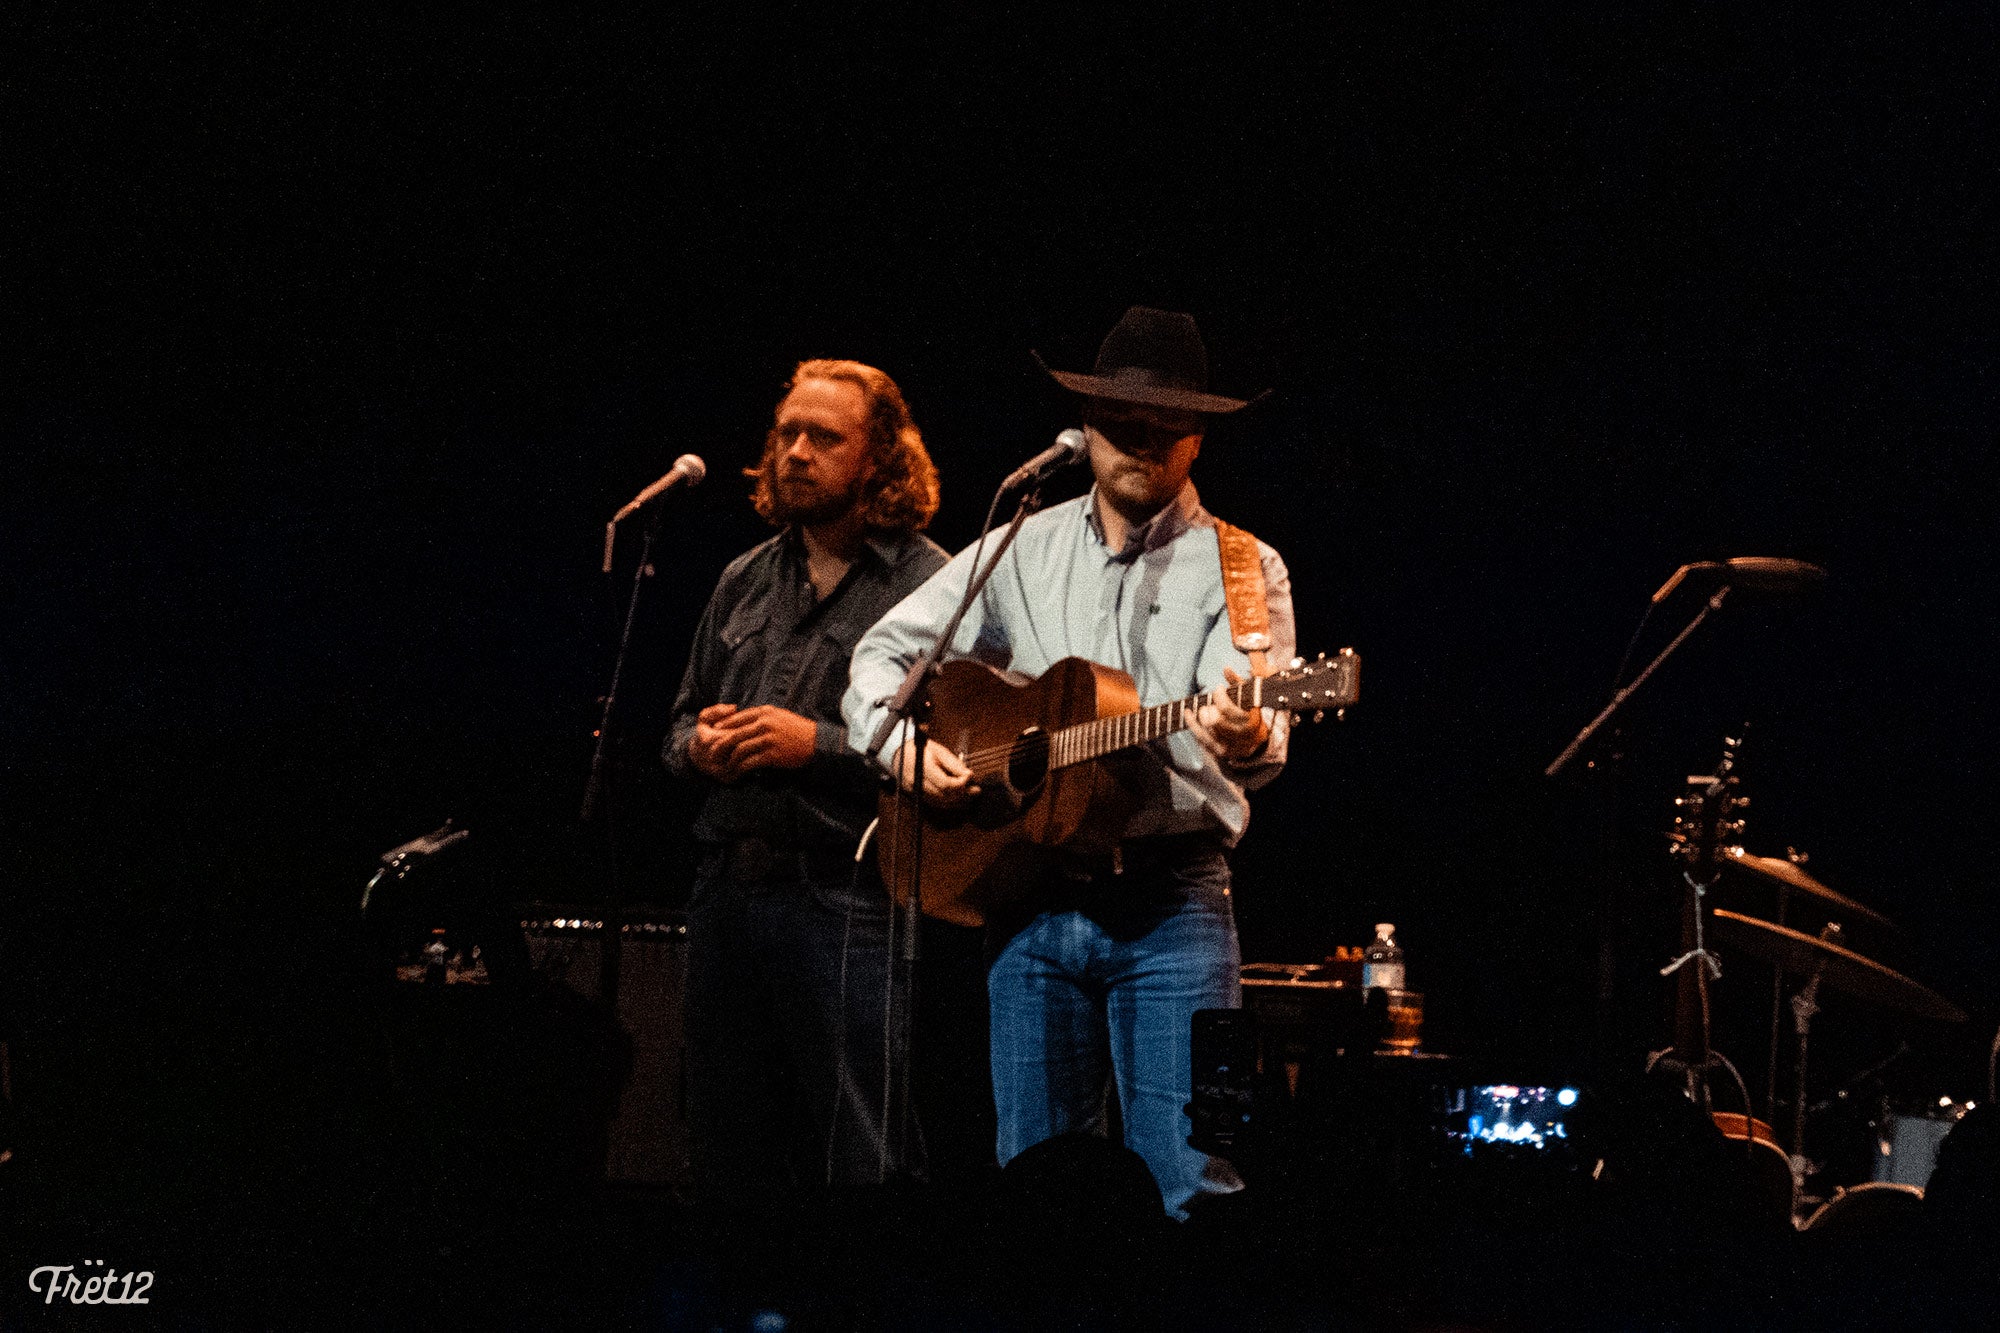 Colter Wall at The Salt Shed - Photos by FRET12